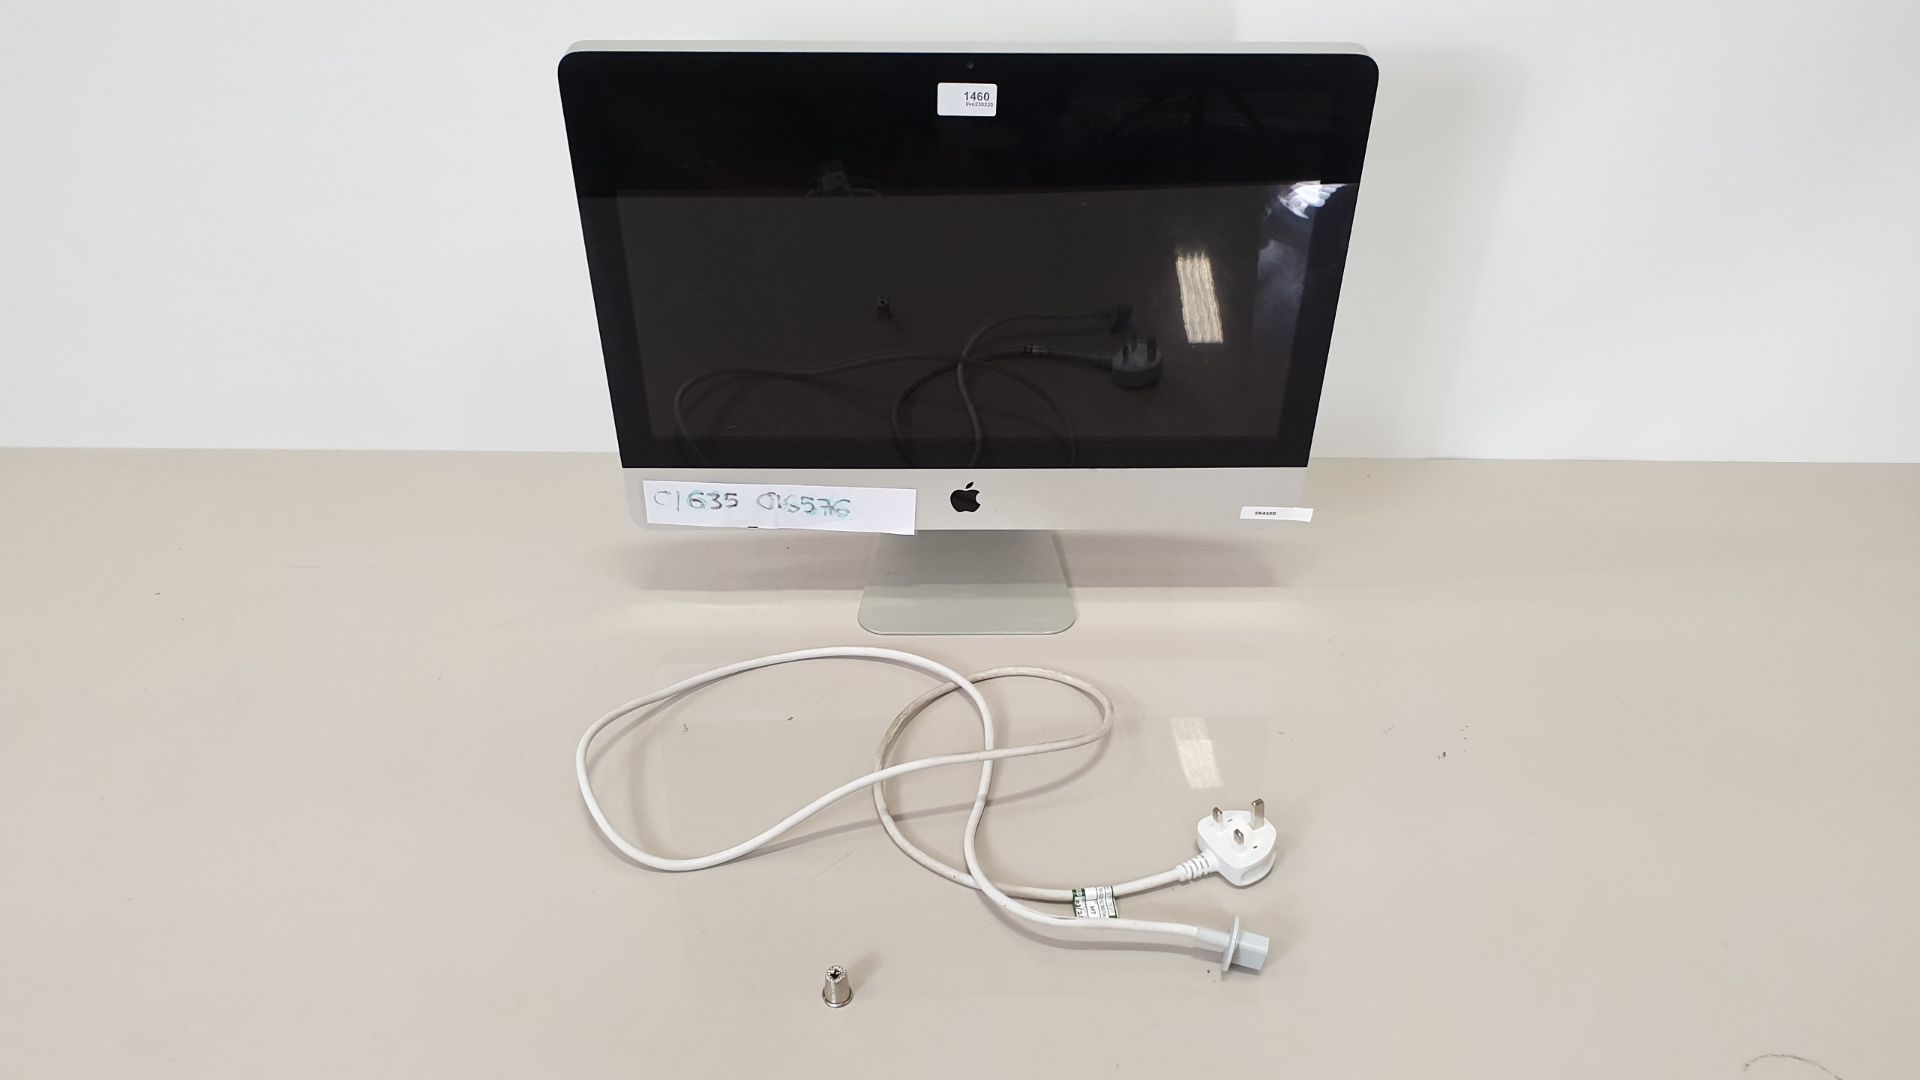 SILVER APPLE IMAC (MODEL - A1311) (SERIAL NUMBER - CO2HN04QDHJF) - NO O/S